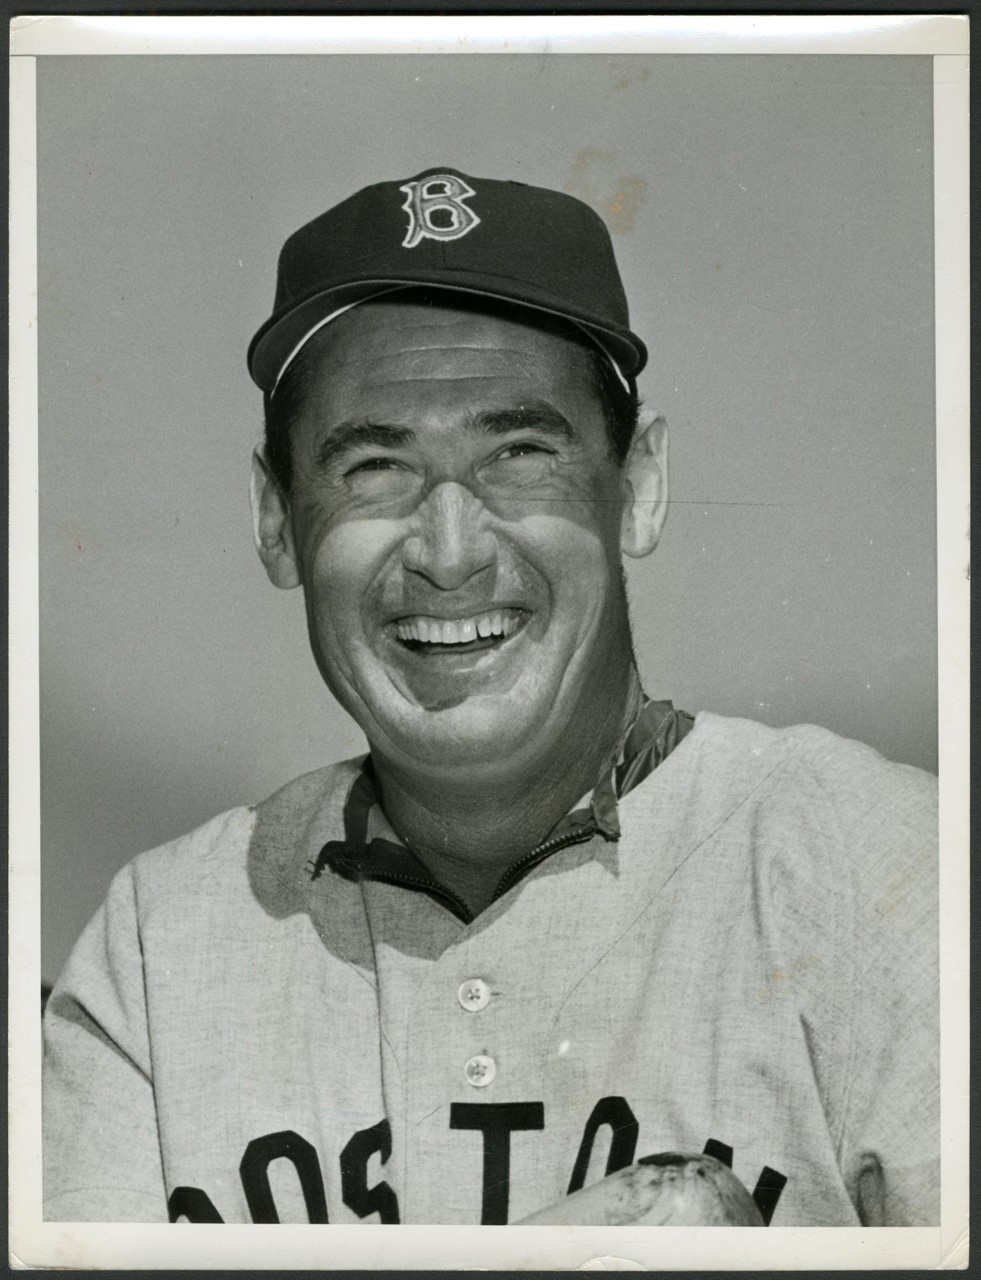 - Ted Williams with a Big Smile Photograph